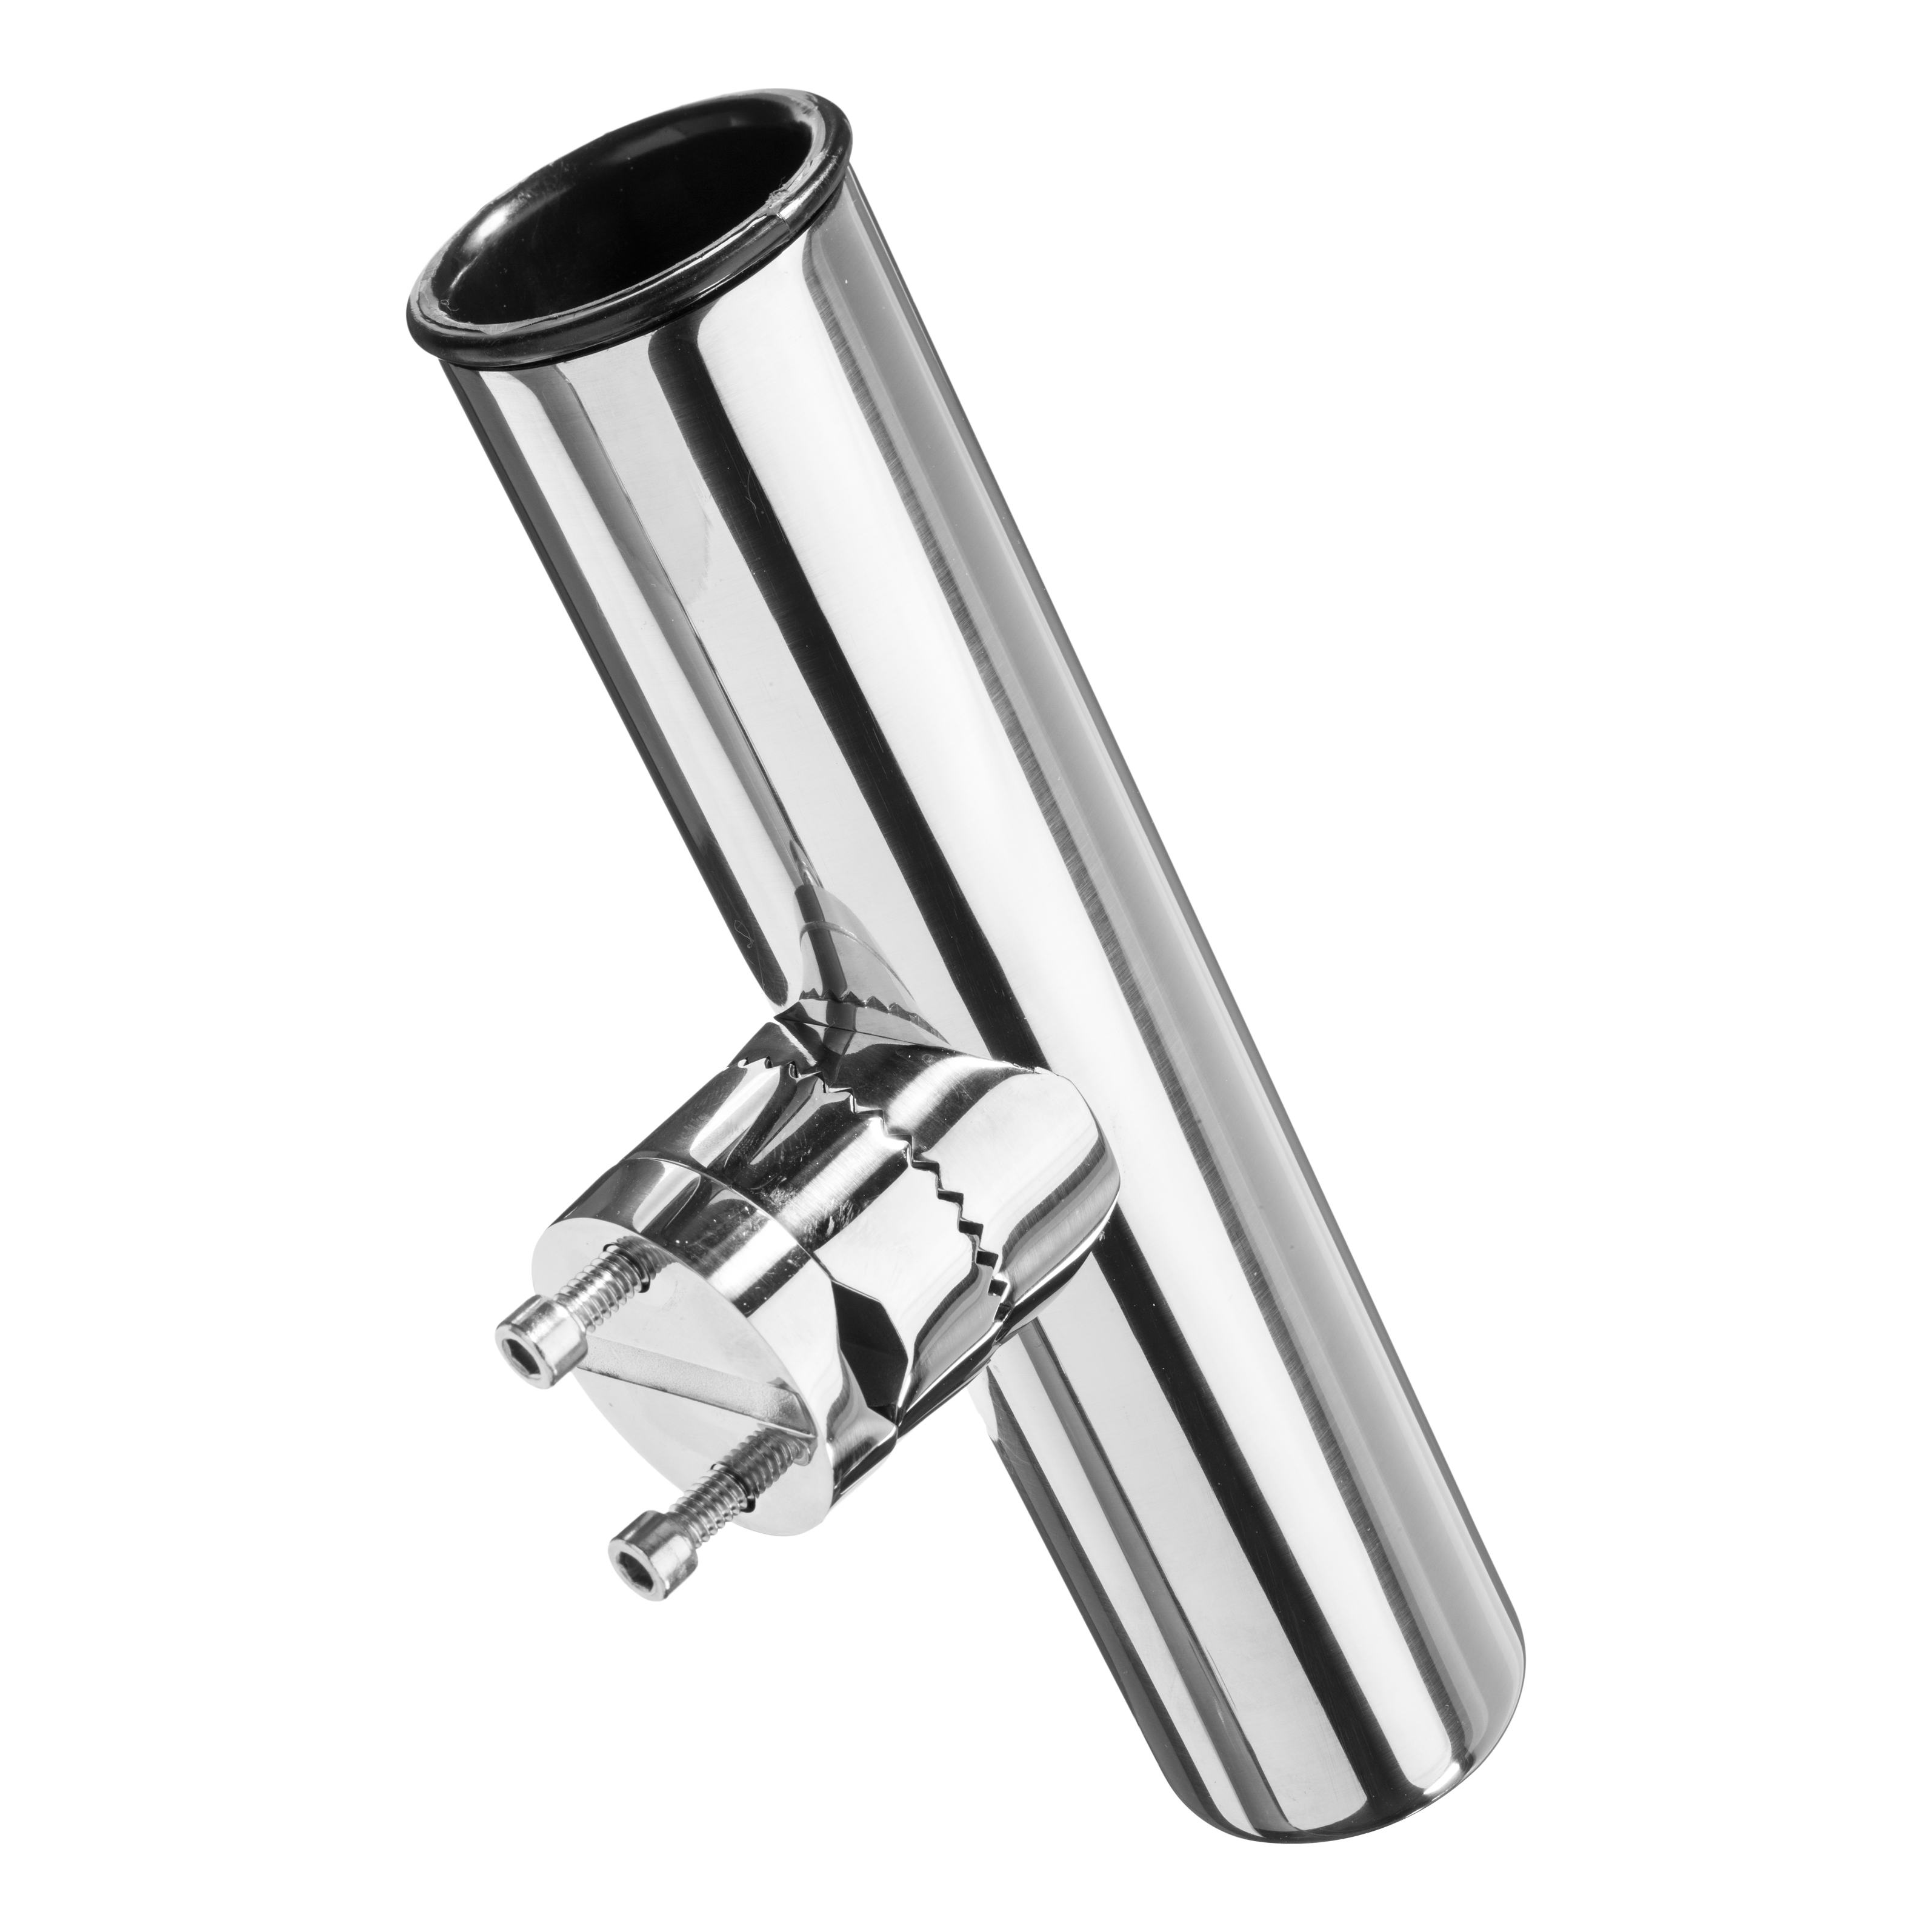 Bass Pro Shops® Stainless Steel Clamp-On Rod Holder